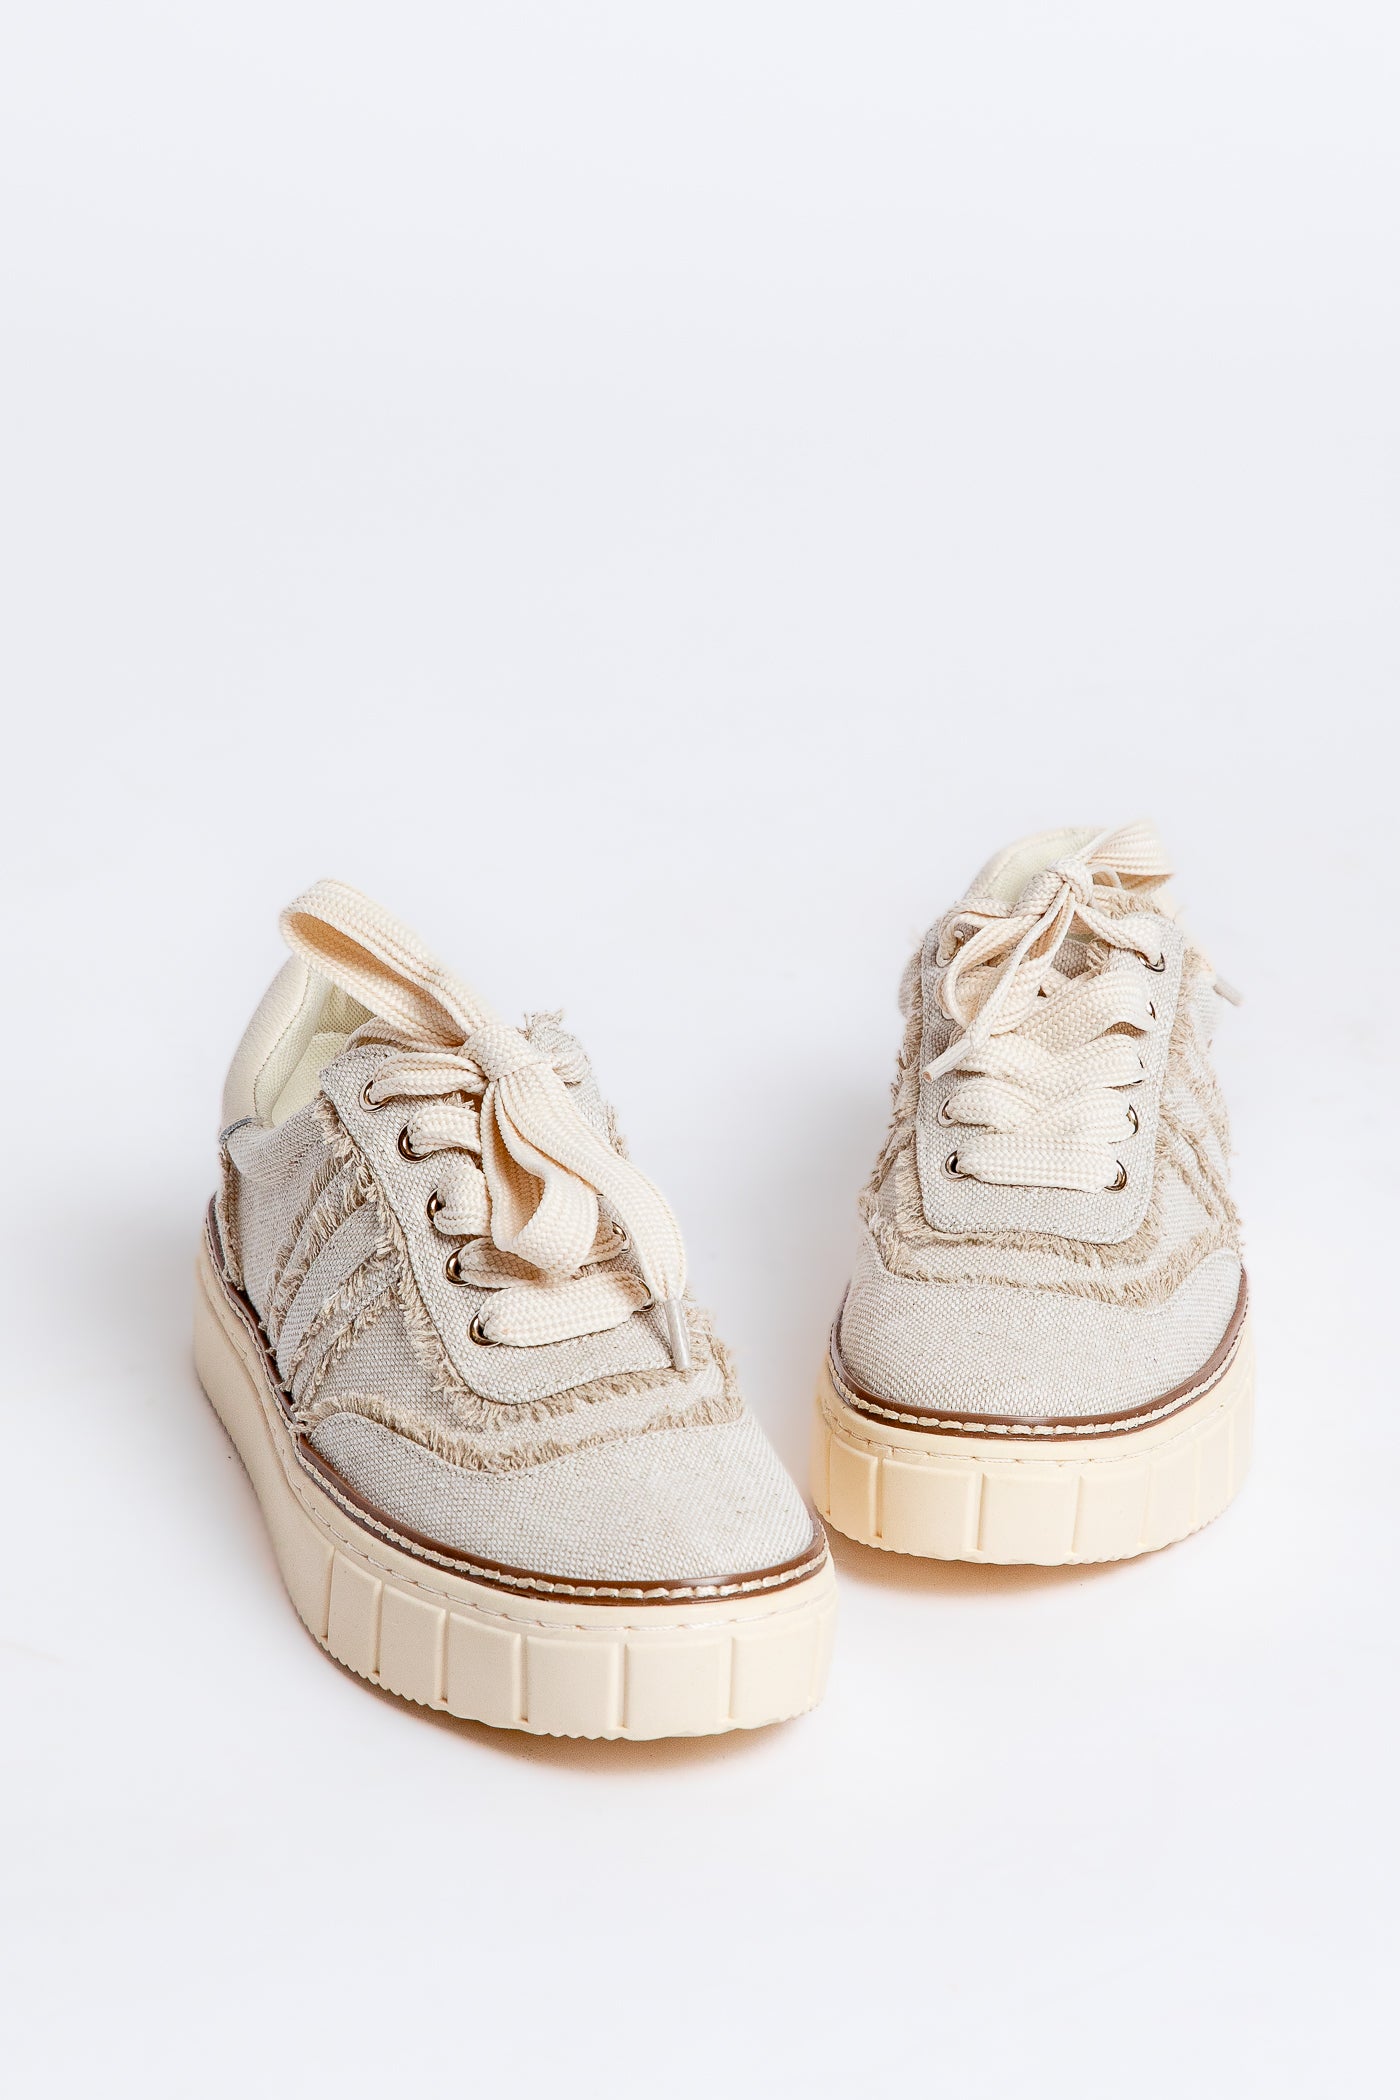 Vince Camuto Reilly Sneaker